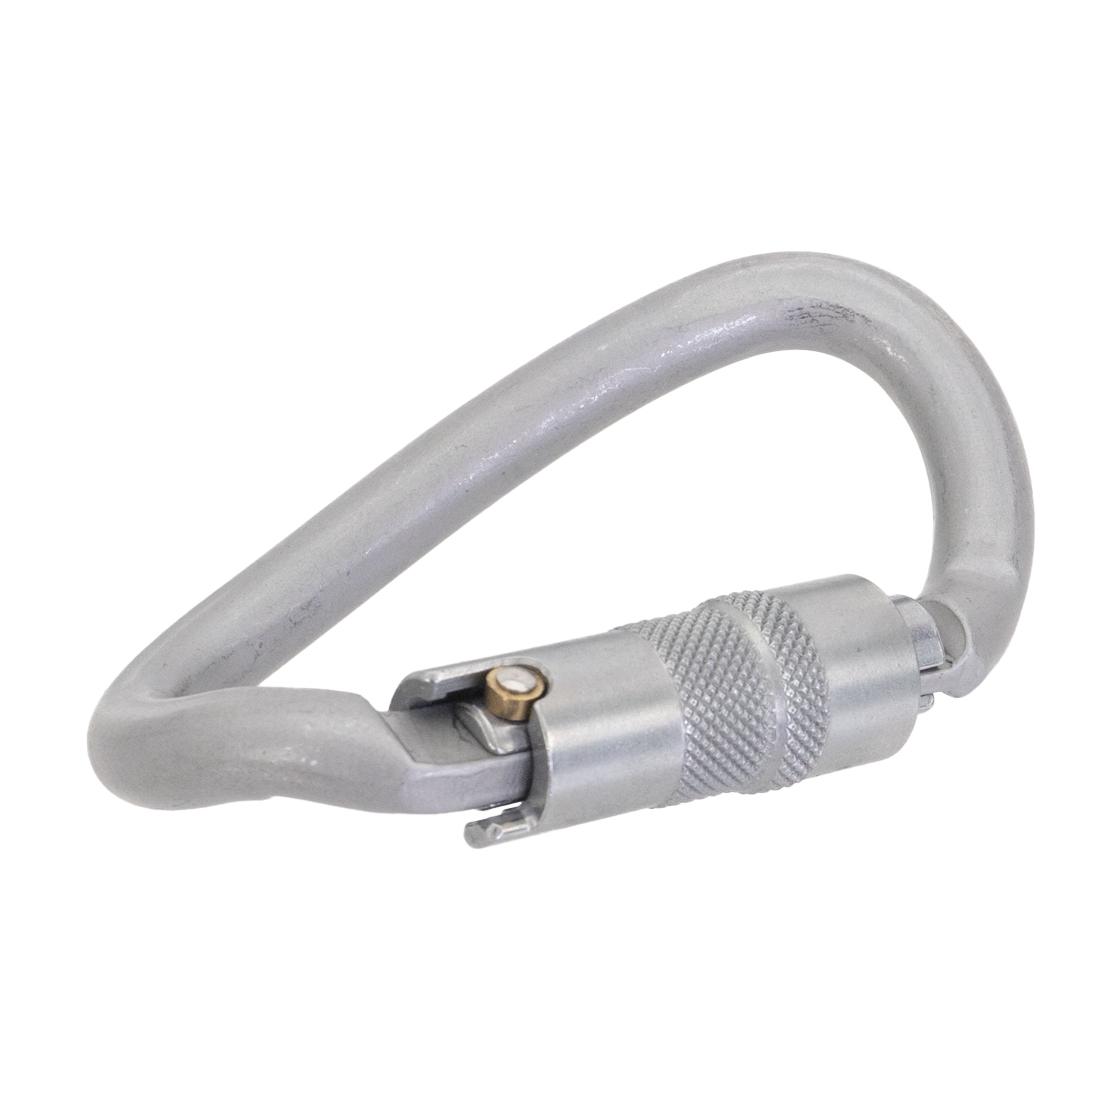 KONG DNA Carabiner - Ovalone Autoblock ANSI Left Side View